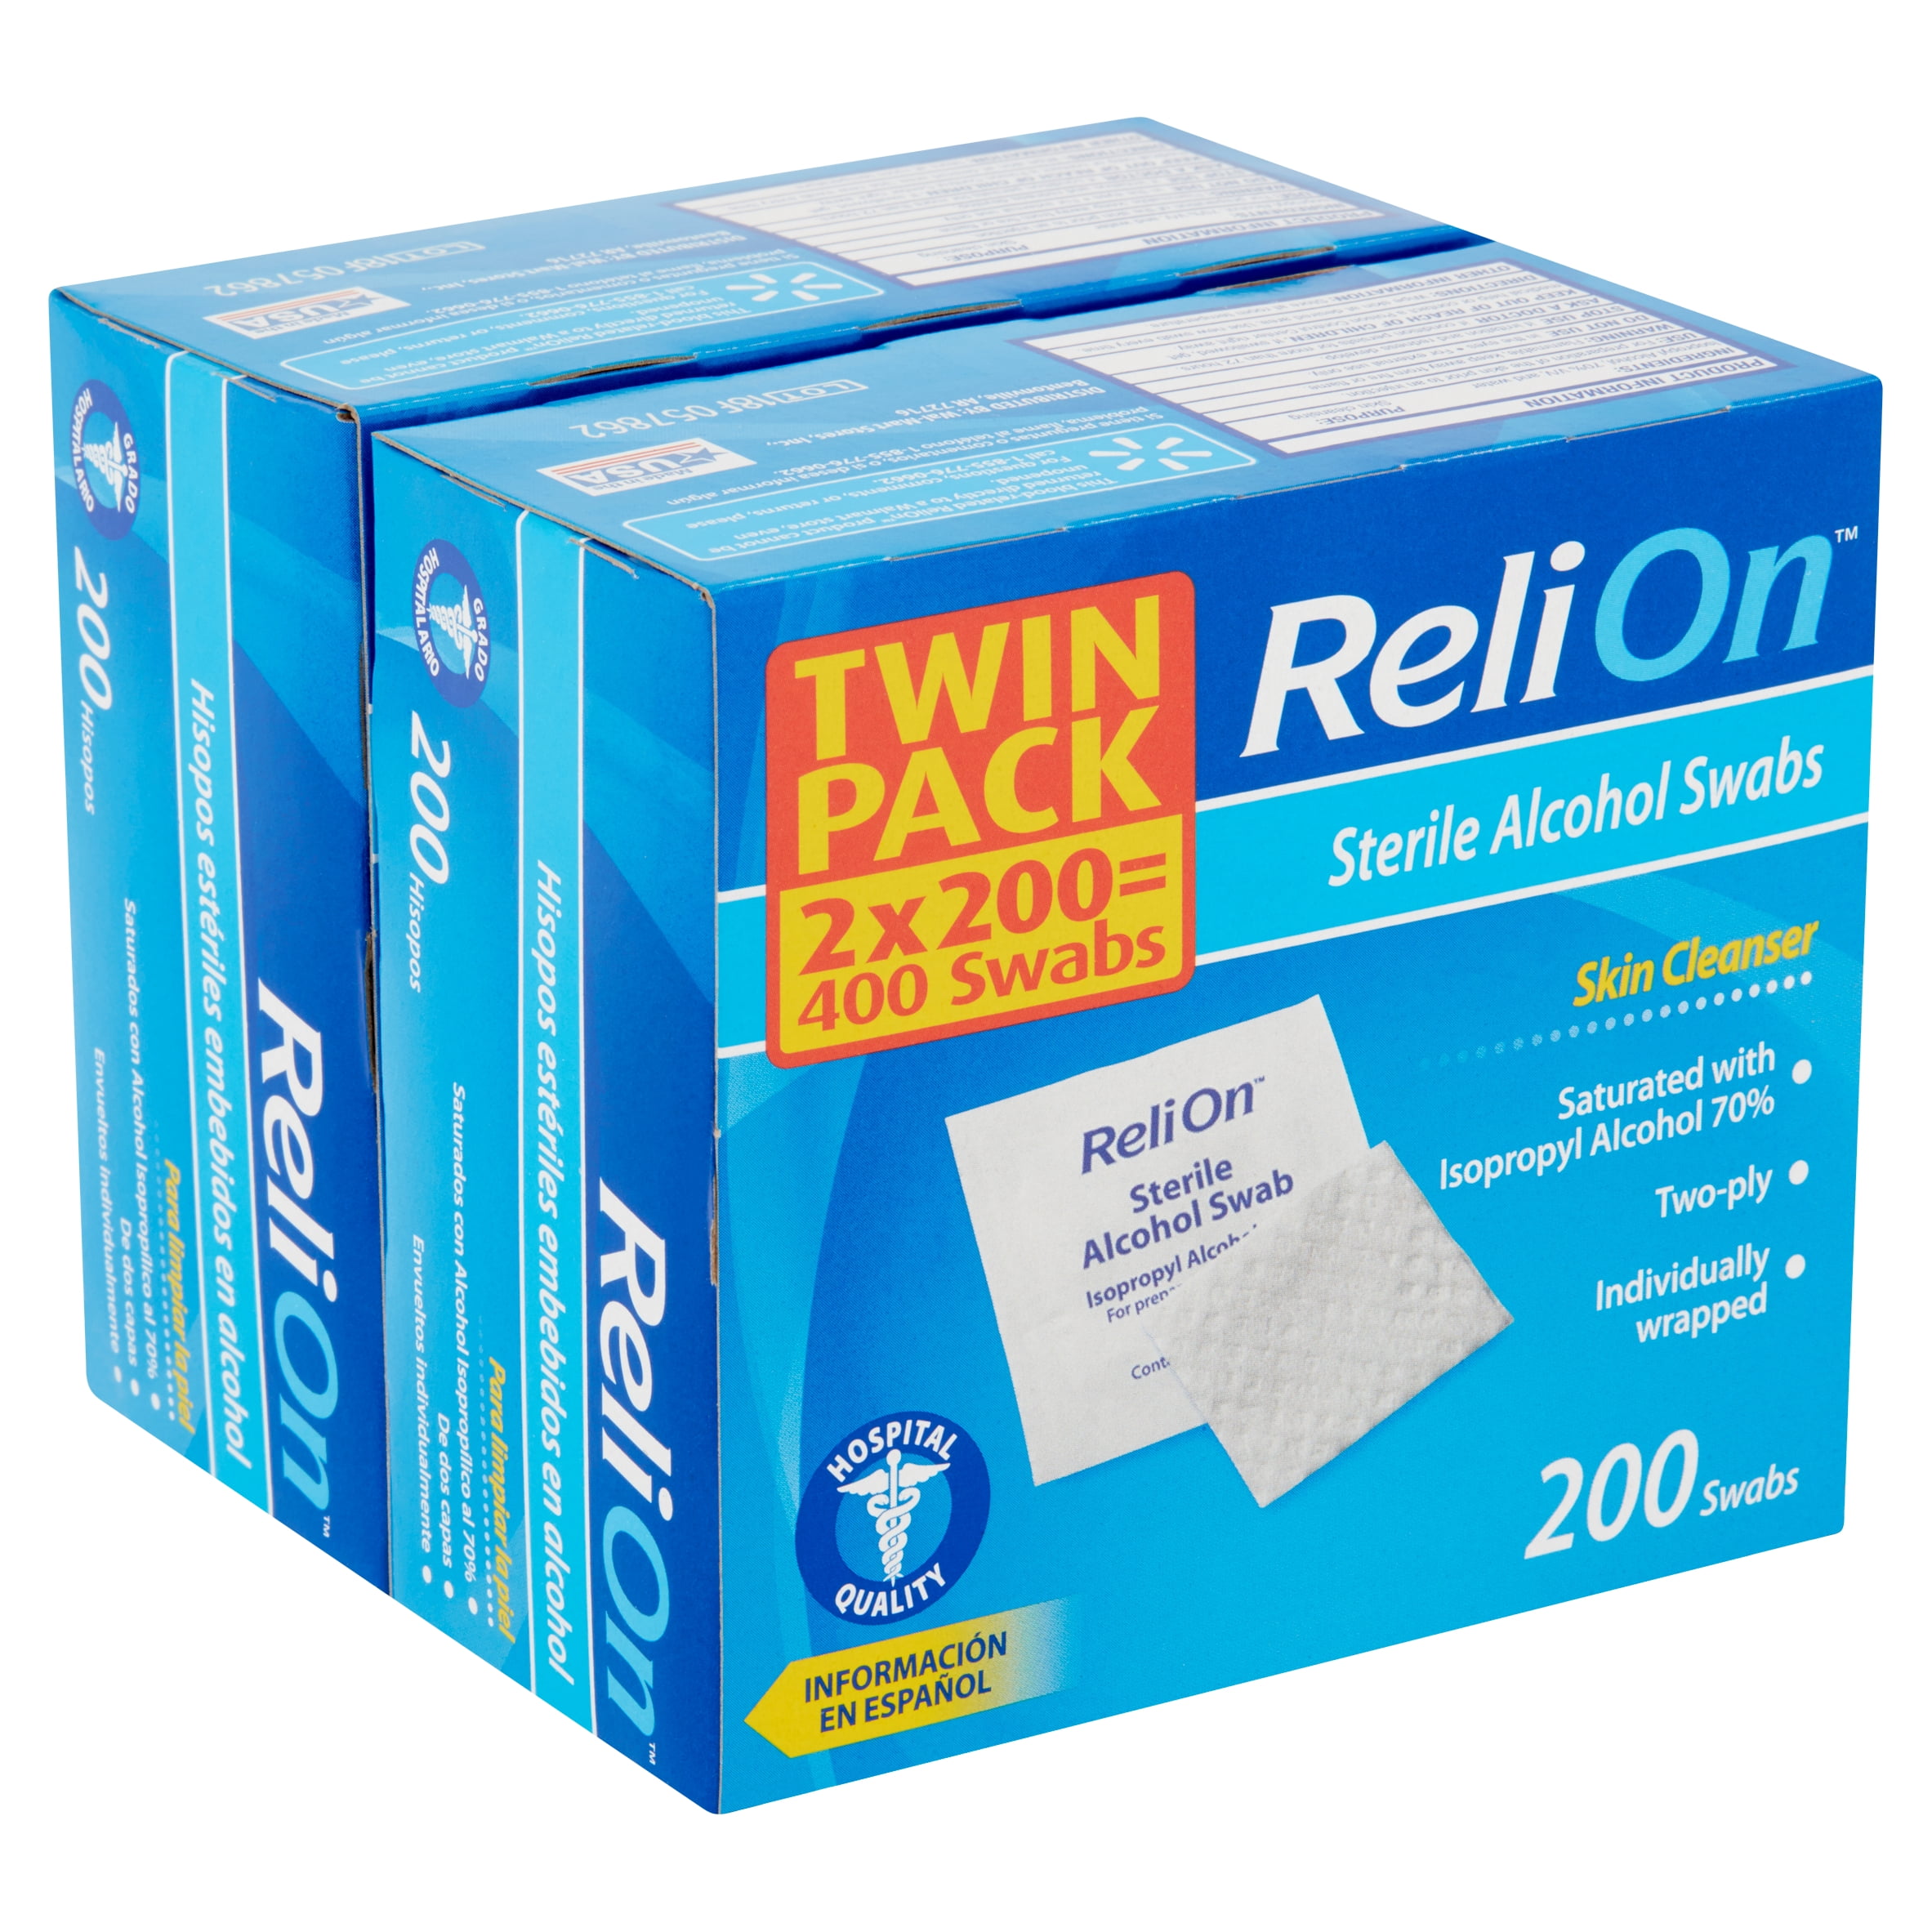 ReliOn Skin Cleanser Sterile Alcohol 